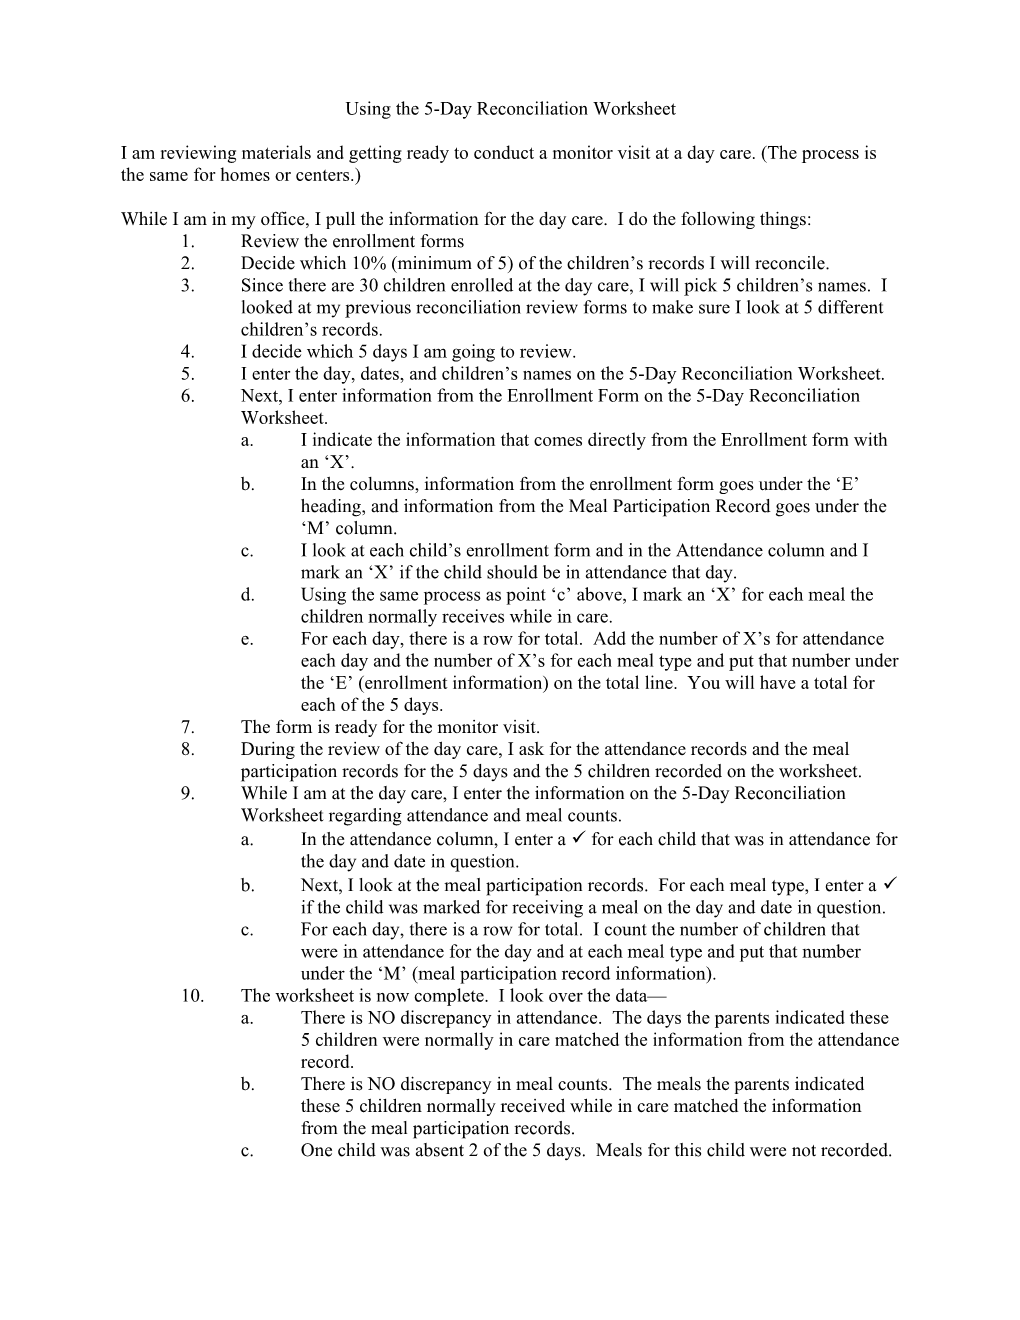 Using the 5-Day Reconciliation Worksheet Refer to SAMPLE